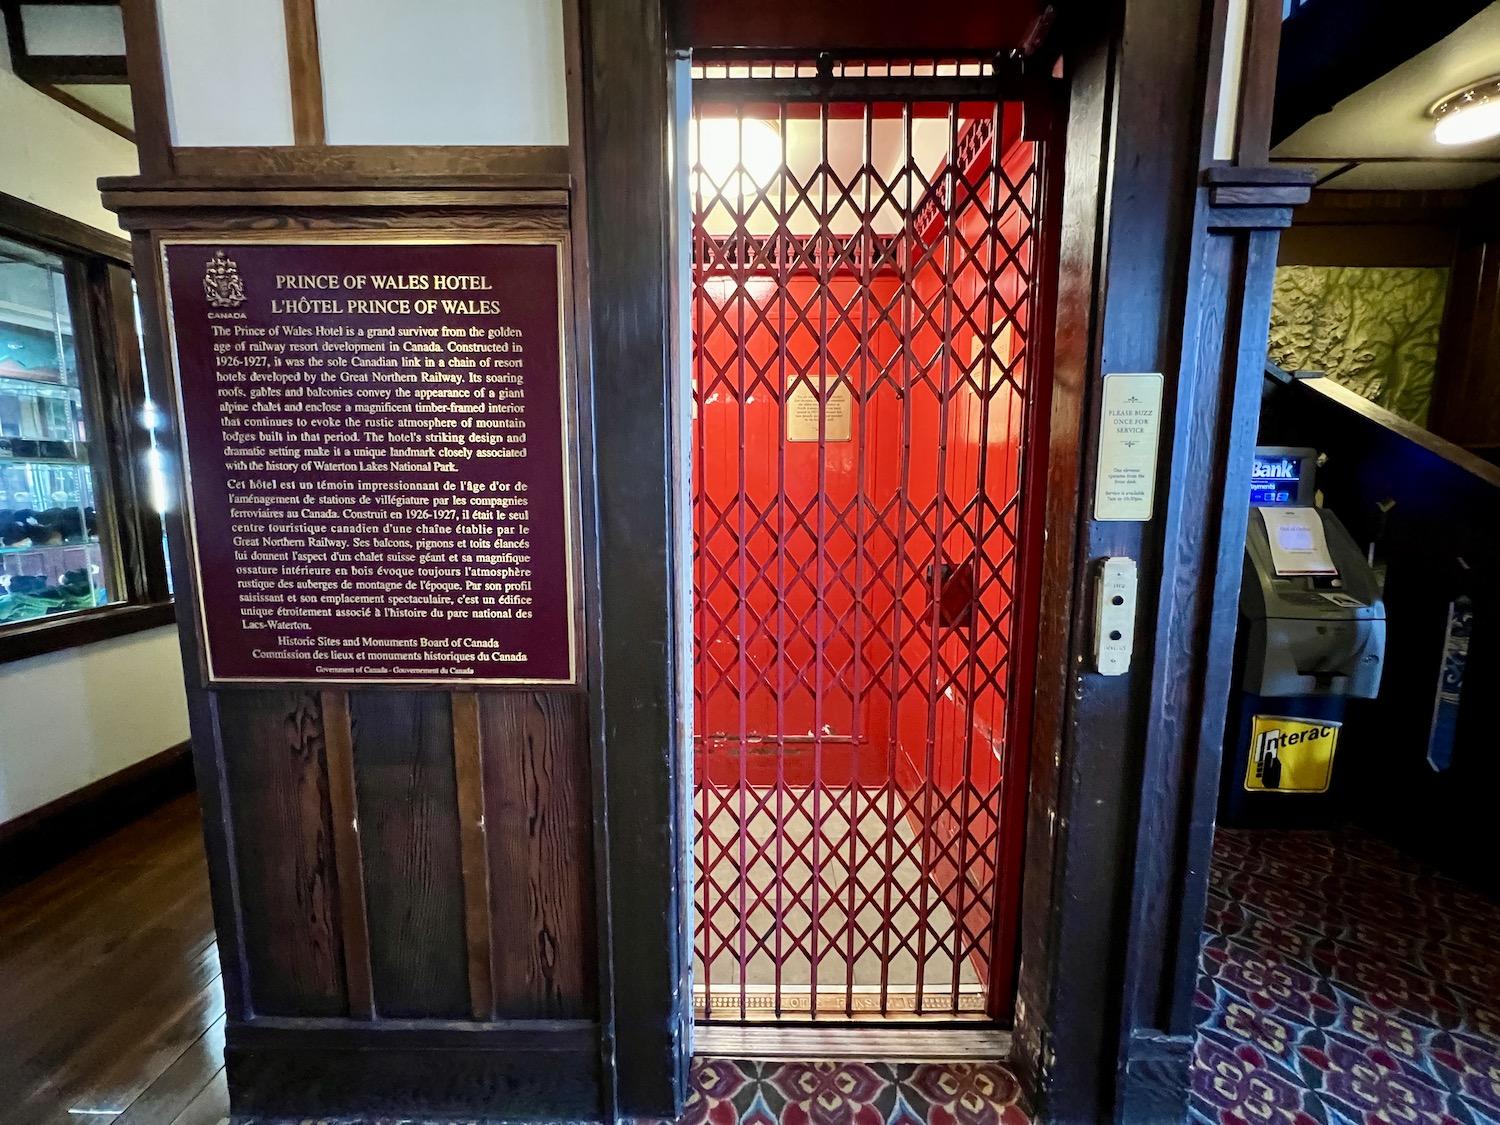 A plaque for Prince of Wales Hotel National Historic Site stands in the hotel's lobby by the vintage elevator.